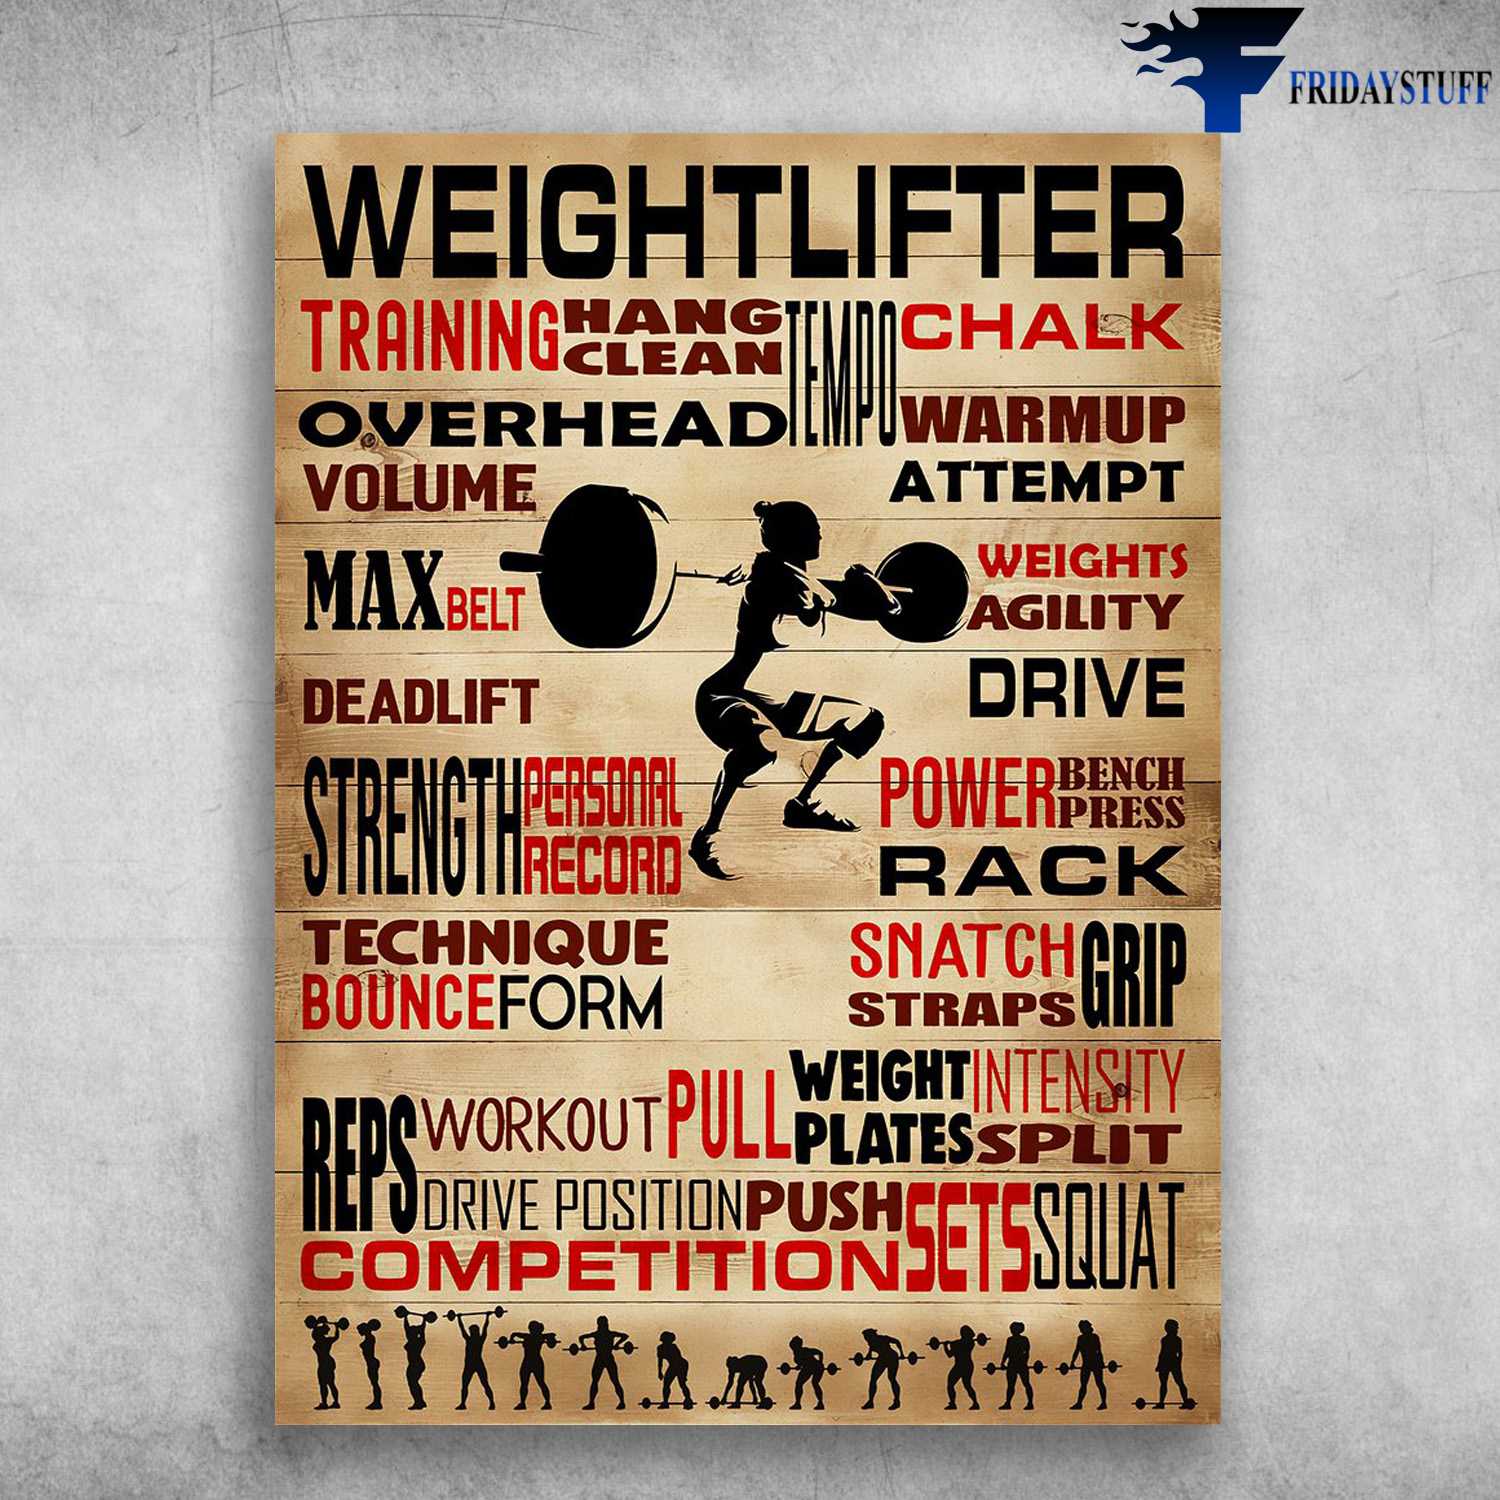 Weightlifter Trainig, Hang Clean, Tempo, Chalk, Gym Room, Overhead Volume, Warmup Attempt, Weightlifting Room